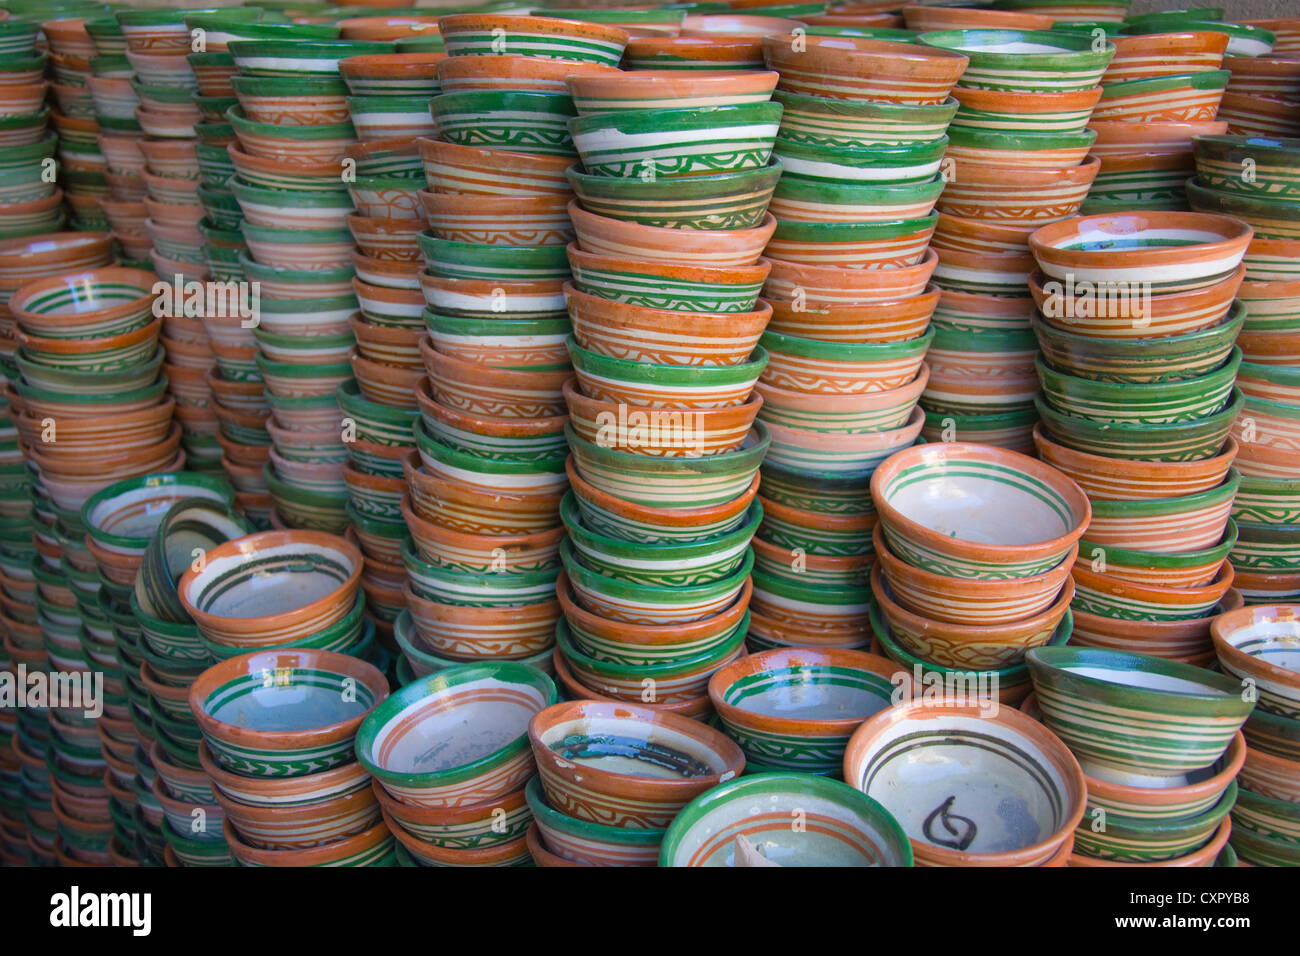 Selling bowls in the old medina, Fes, Morocco Stock Photo